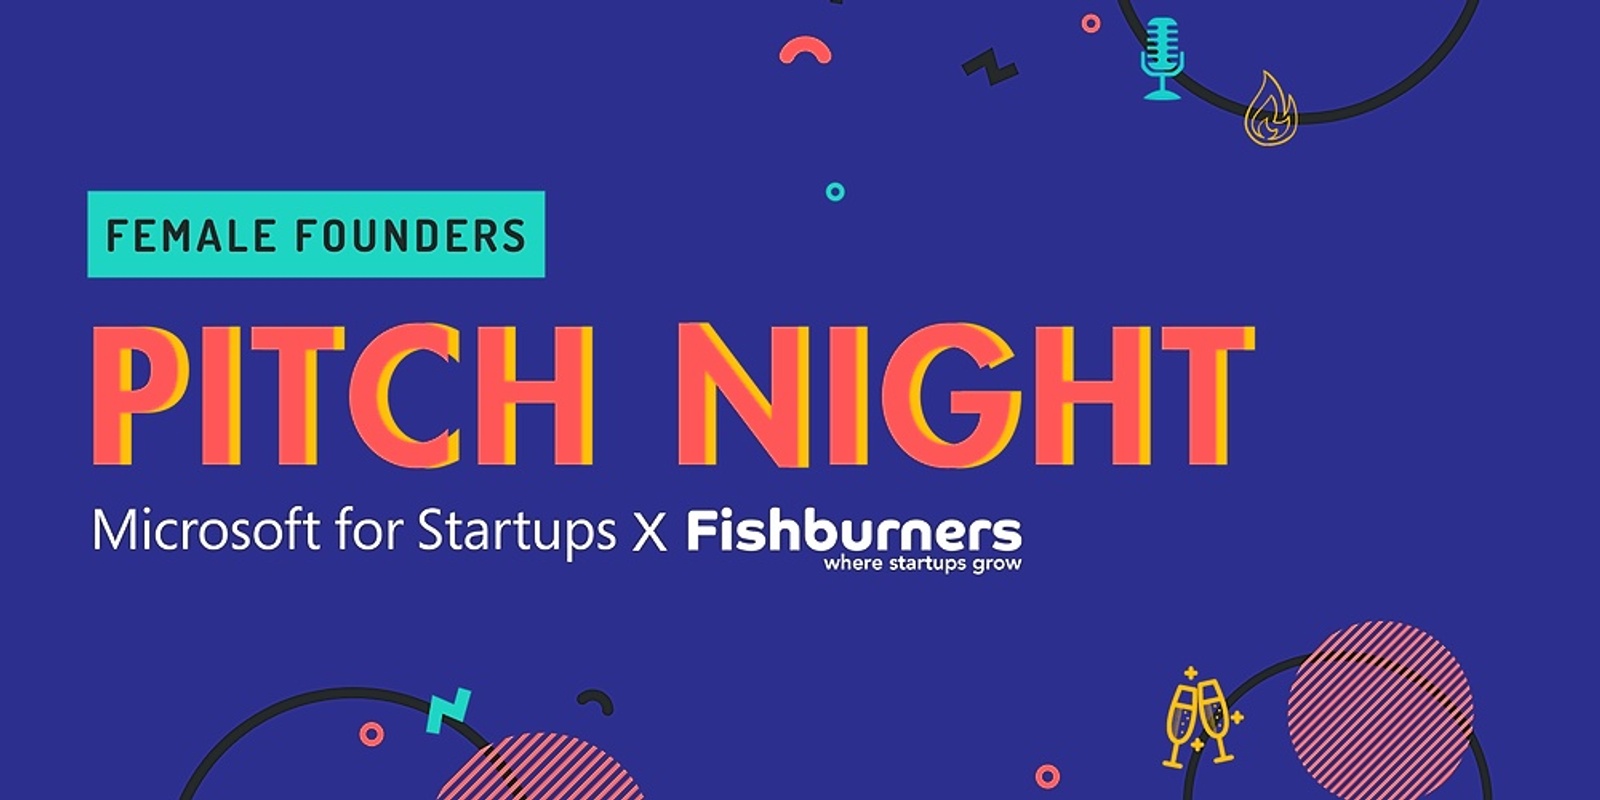 Female Founders Pitch Night with Microsoft for Startups 